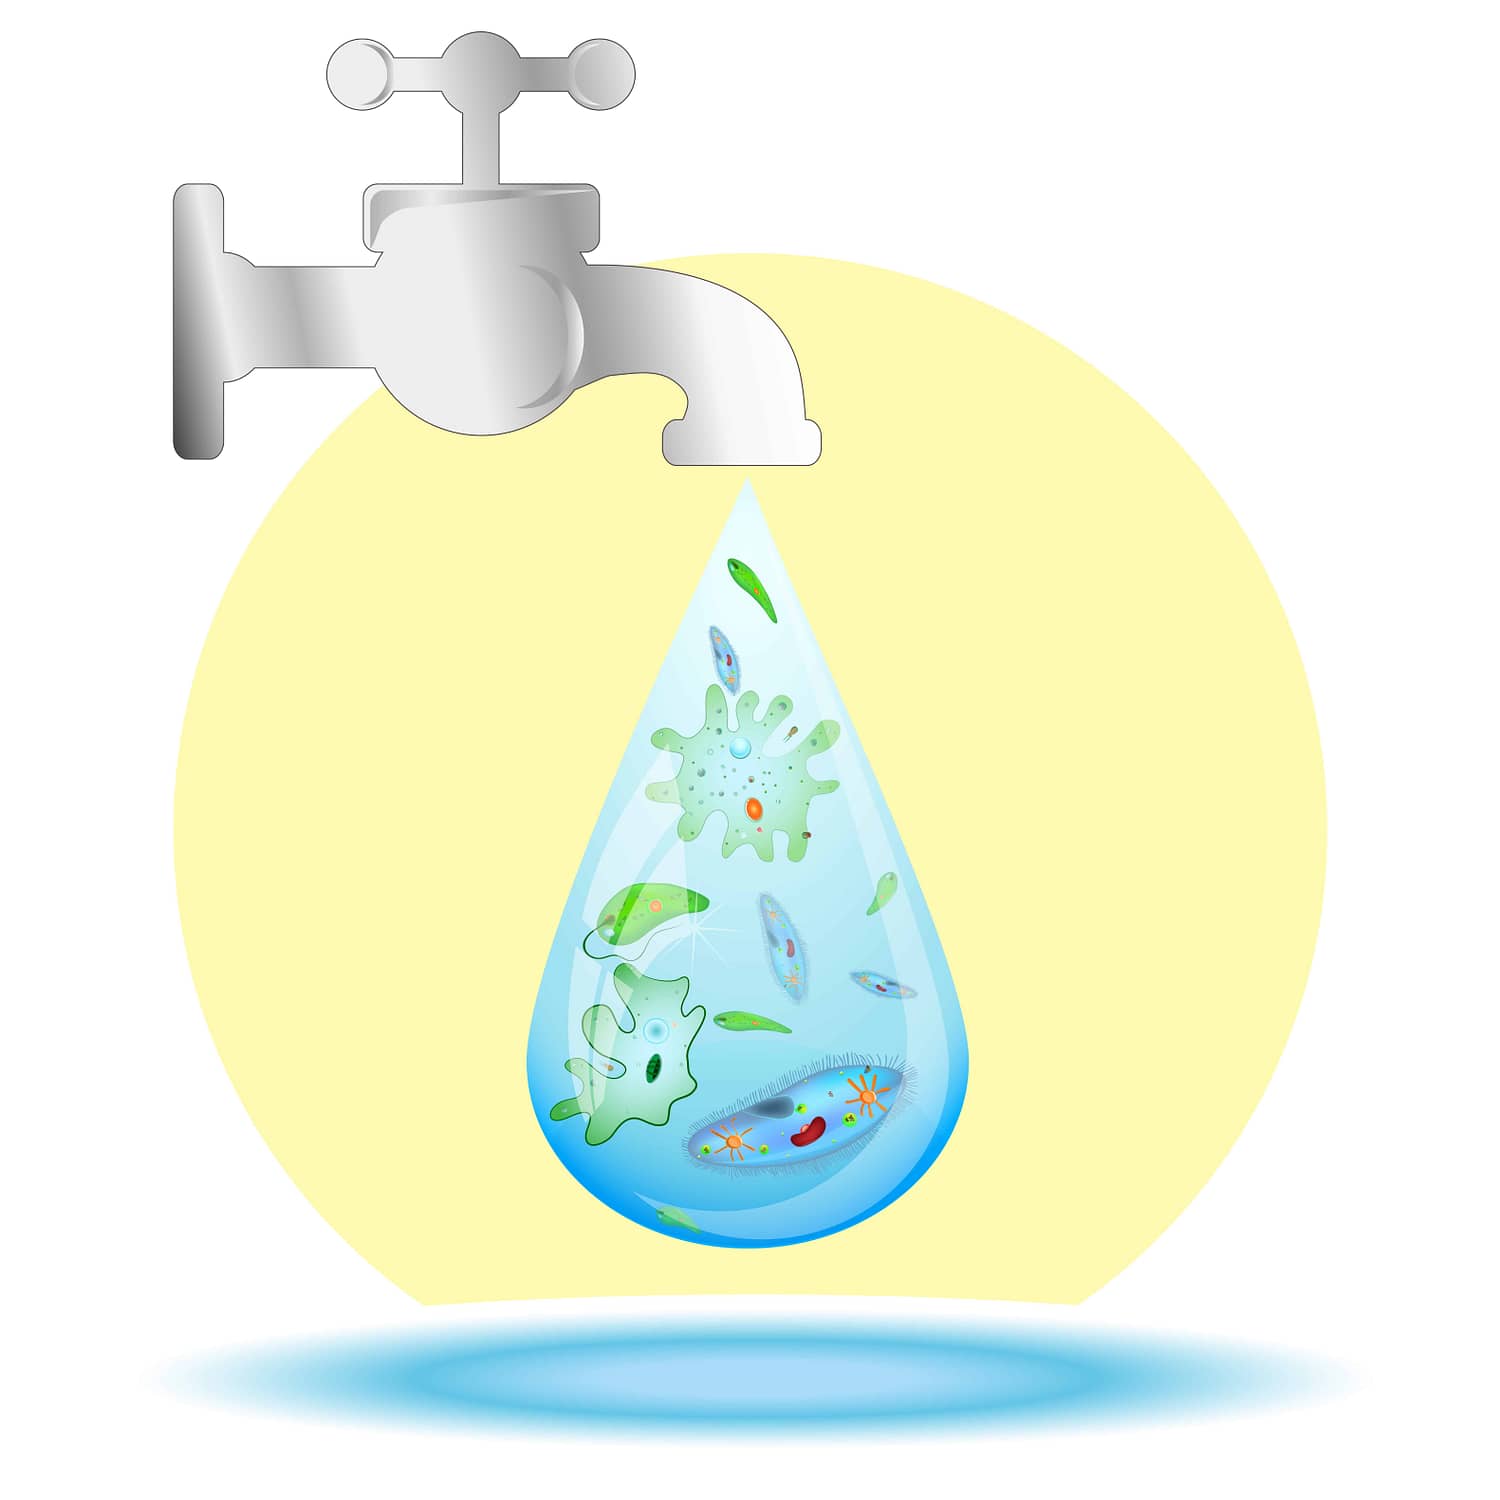 Illustration of polluted tap water